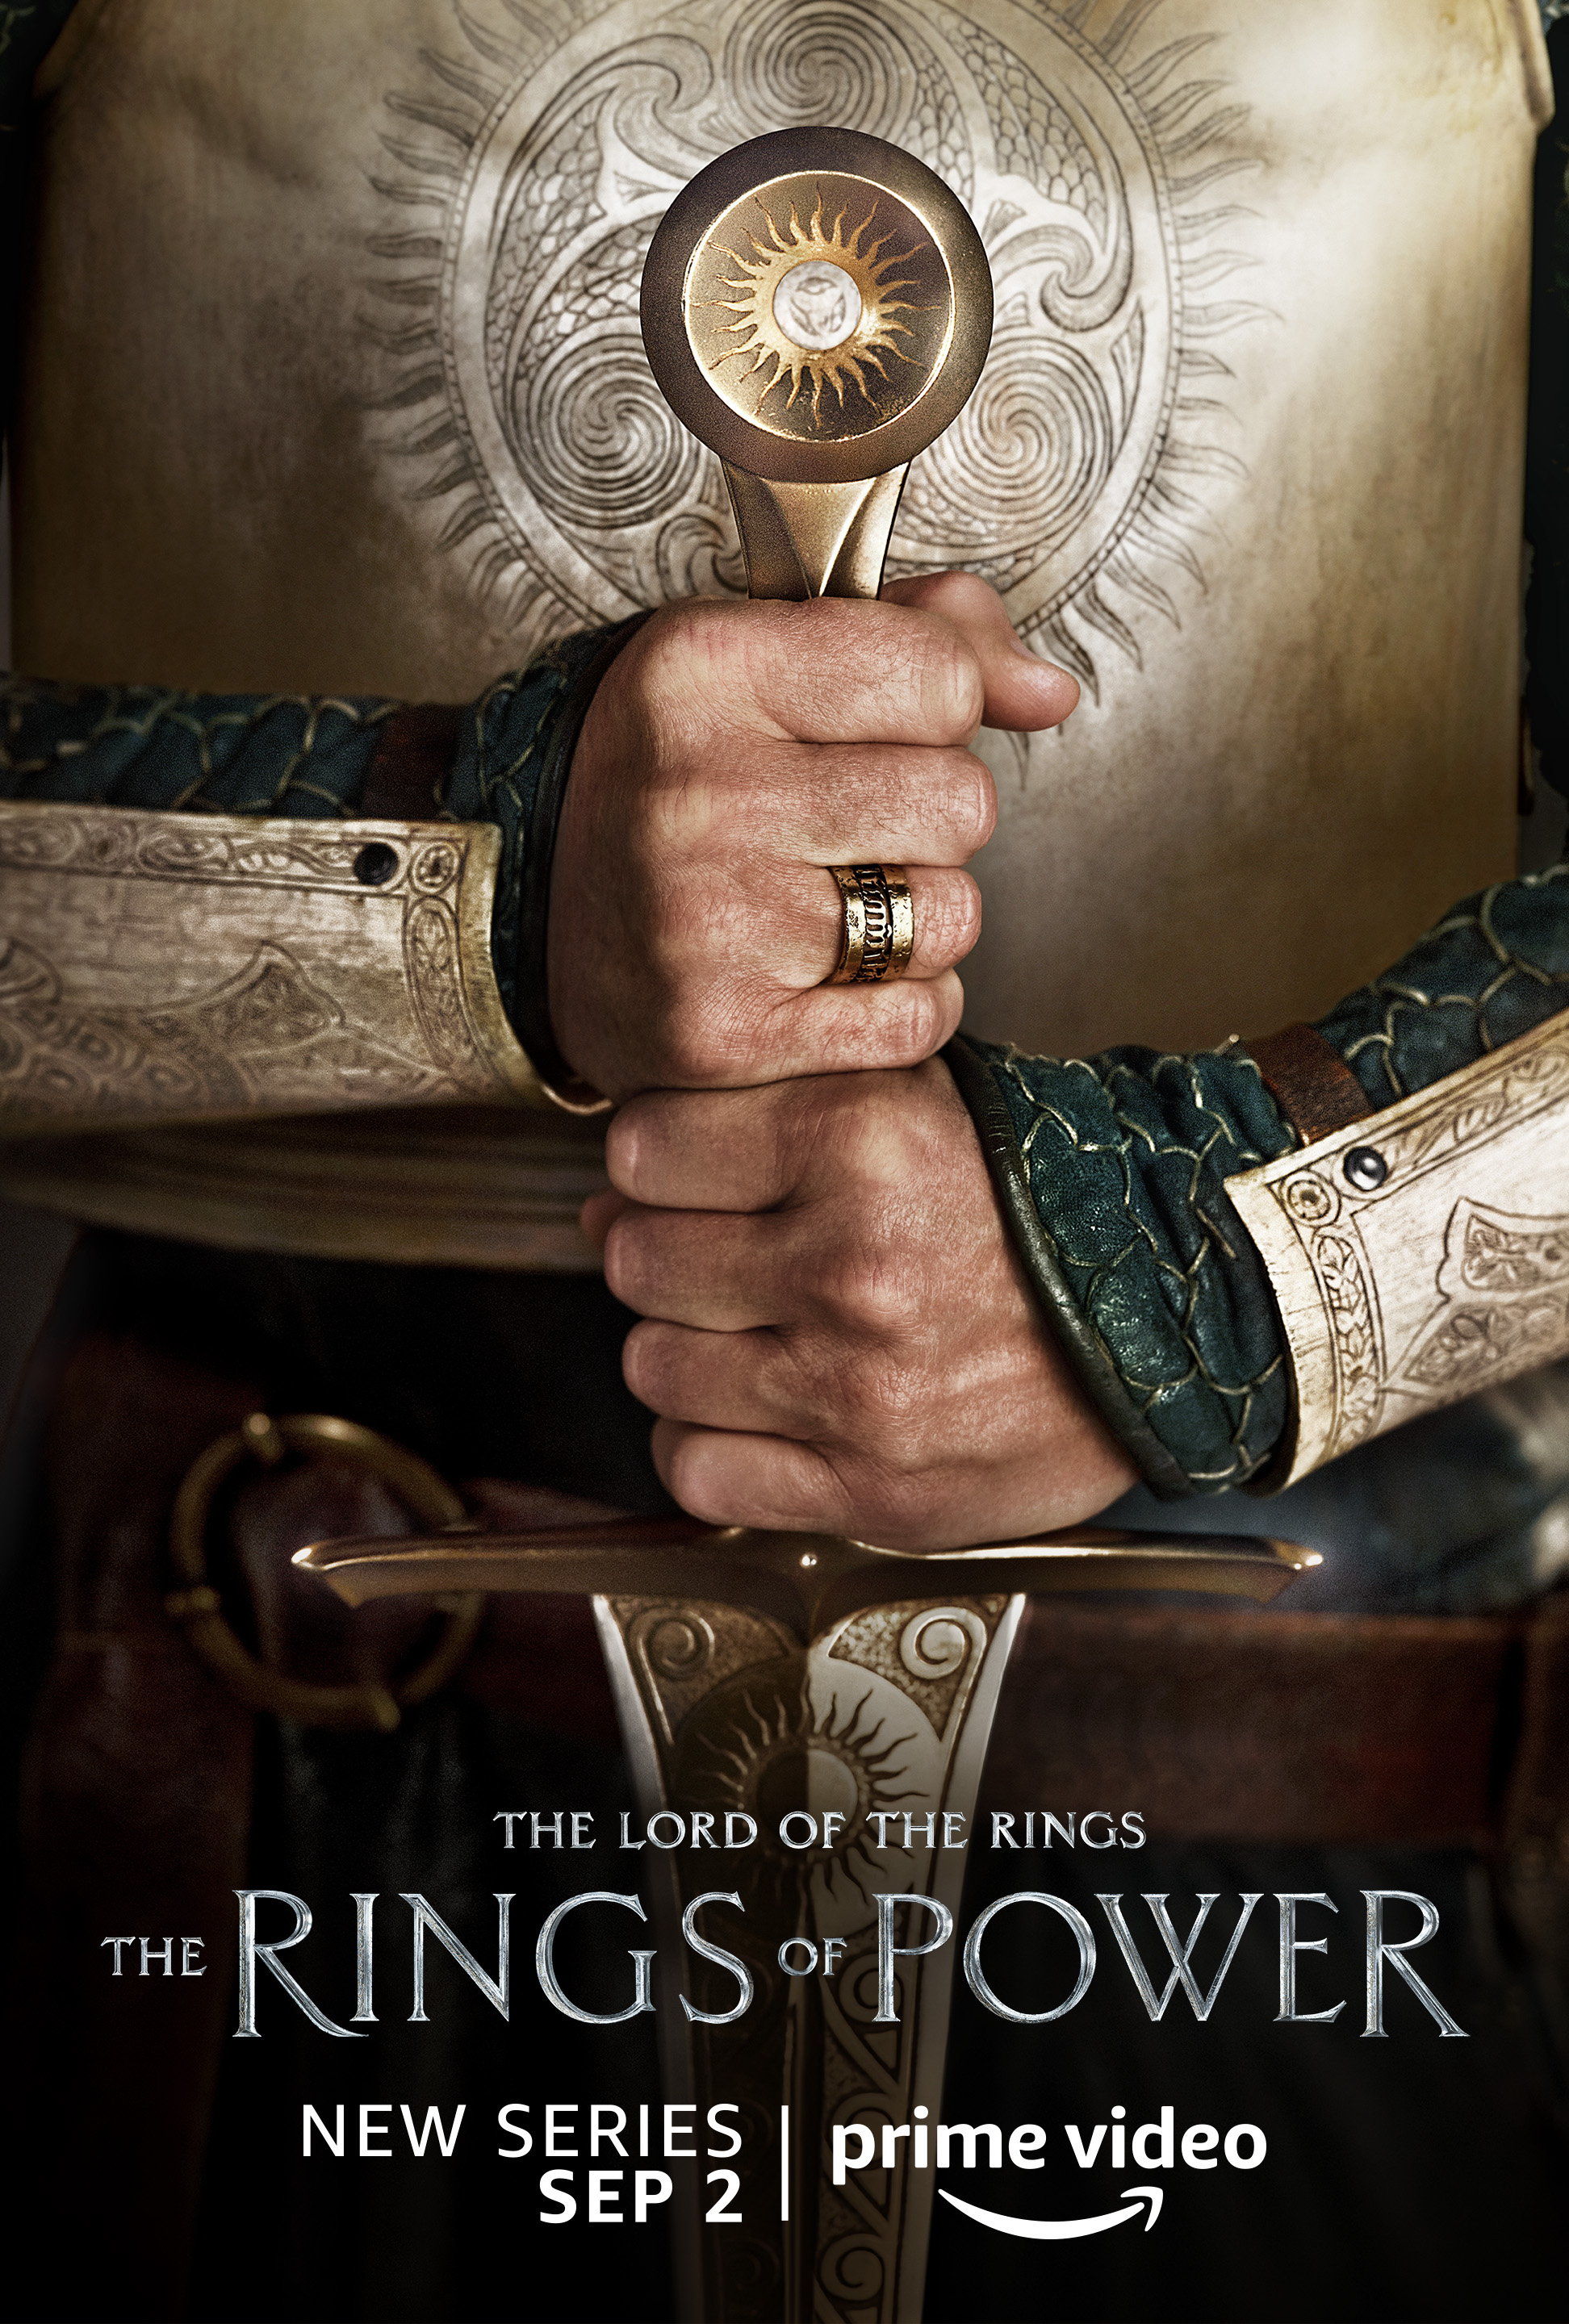 Pan prstenu: Prsteny moci / The Lord of the Rings: The Rings of Power S01E04 (2022)(CZ/EN)[Webrip][720p] = CSFD 66%